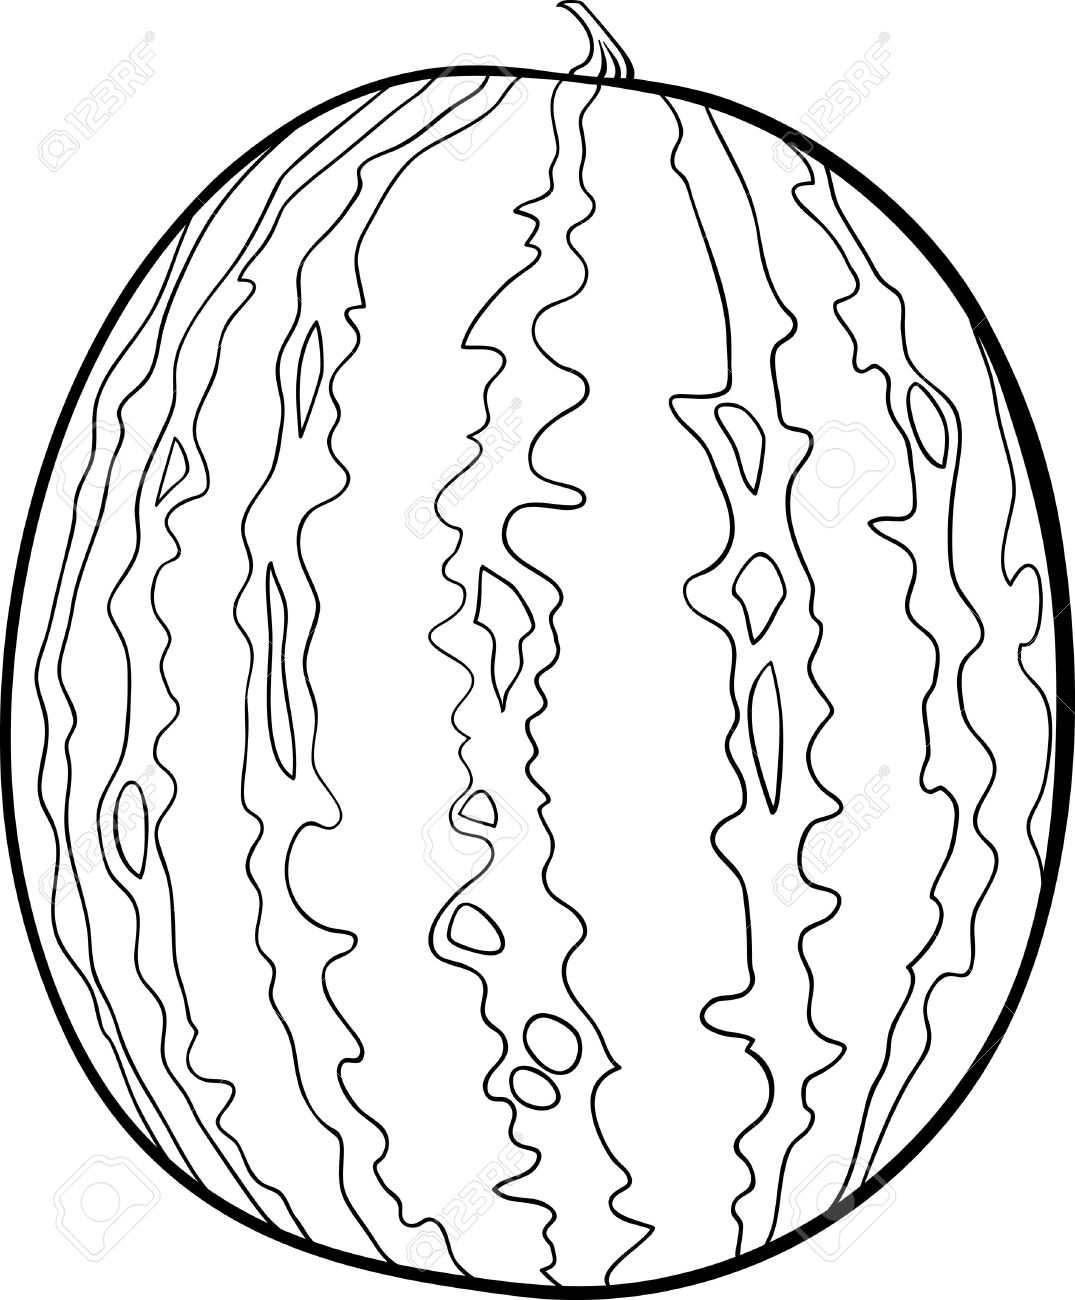 Clipart of watermelon black and white 